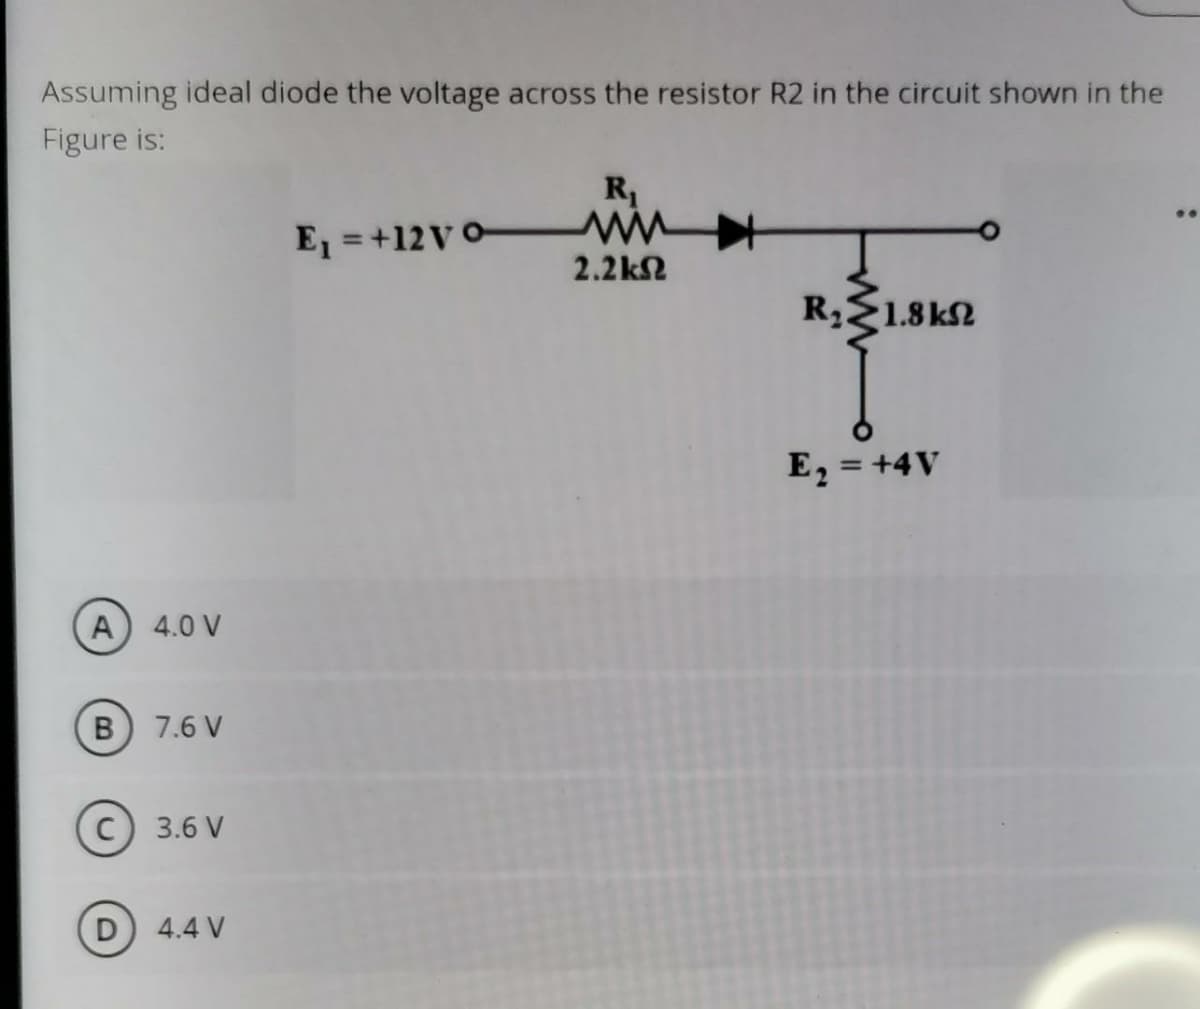 Assuming ideal diode the voltage across the resistor R2 in the circuit shown in the
Figure is:
R1
E = +12V0-
2.2k2
RE1.8kN
E, = +4V
A
4.0 V
7.6 V
3.6 V
D 4.4 V
